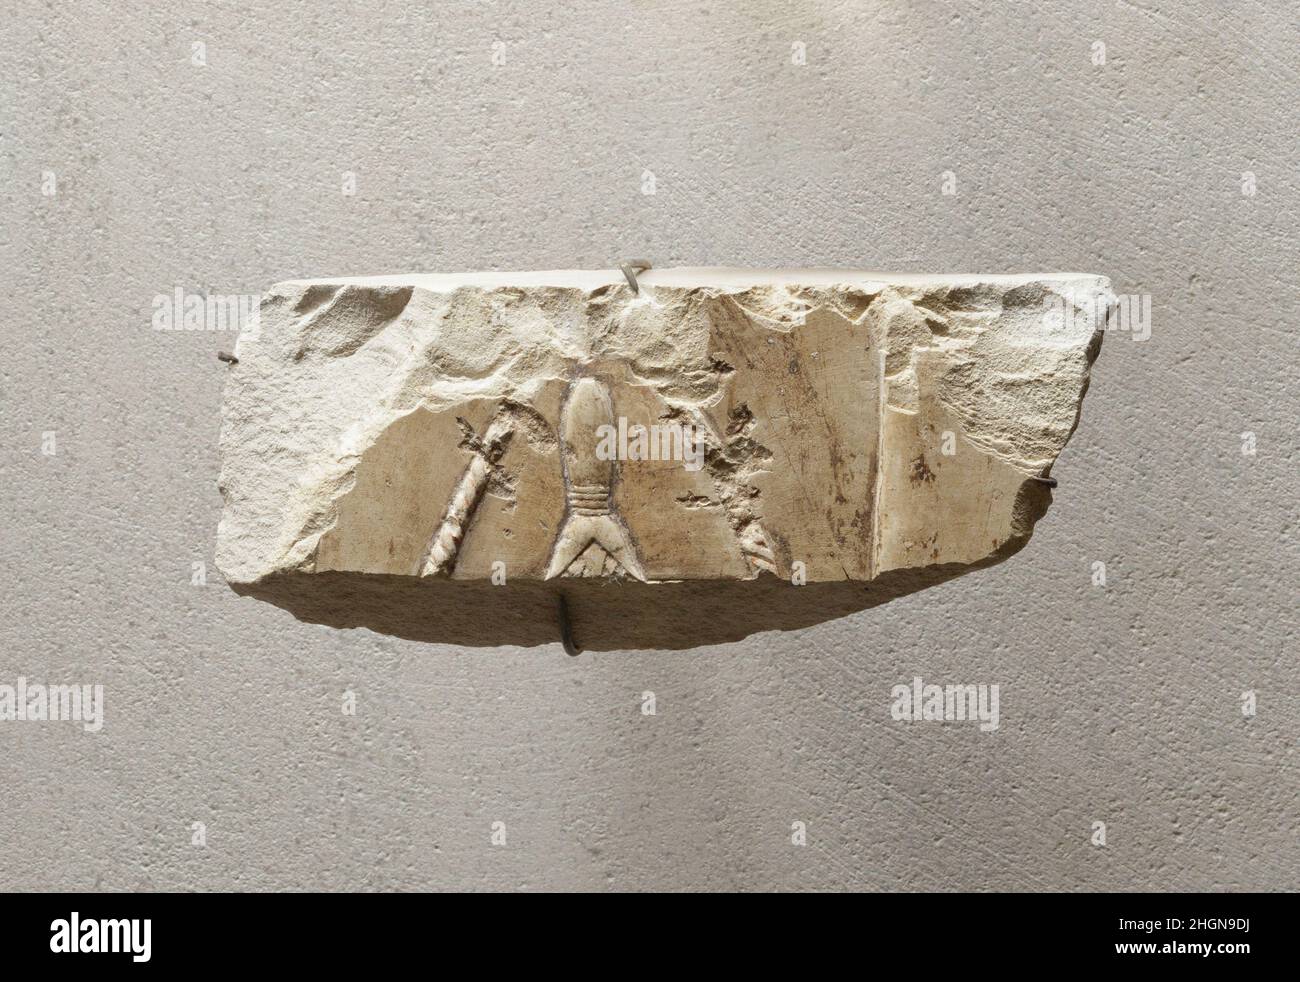 Relief showing the handle of a mirror - see 26.3.353-3 ca. 2051–2030 B.C. Middle Kingdom. Relief showing the handle of a mirror - see 26.3.353-3. ca. 2051–2030 B.C.. Limestone, paint. Middle Kingdom. From Egypt, Upper Egypt, Thebes, Deir el-Bahri, Tomb of Neferu (TT 319, MMA 31), MMA excavations, 1923–25. Dynasty 11 Stock Photo